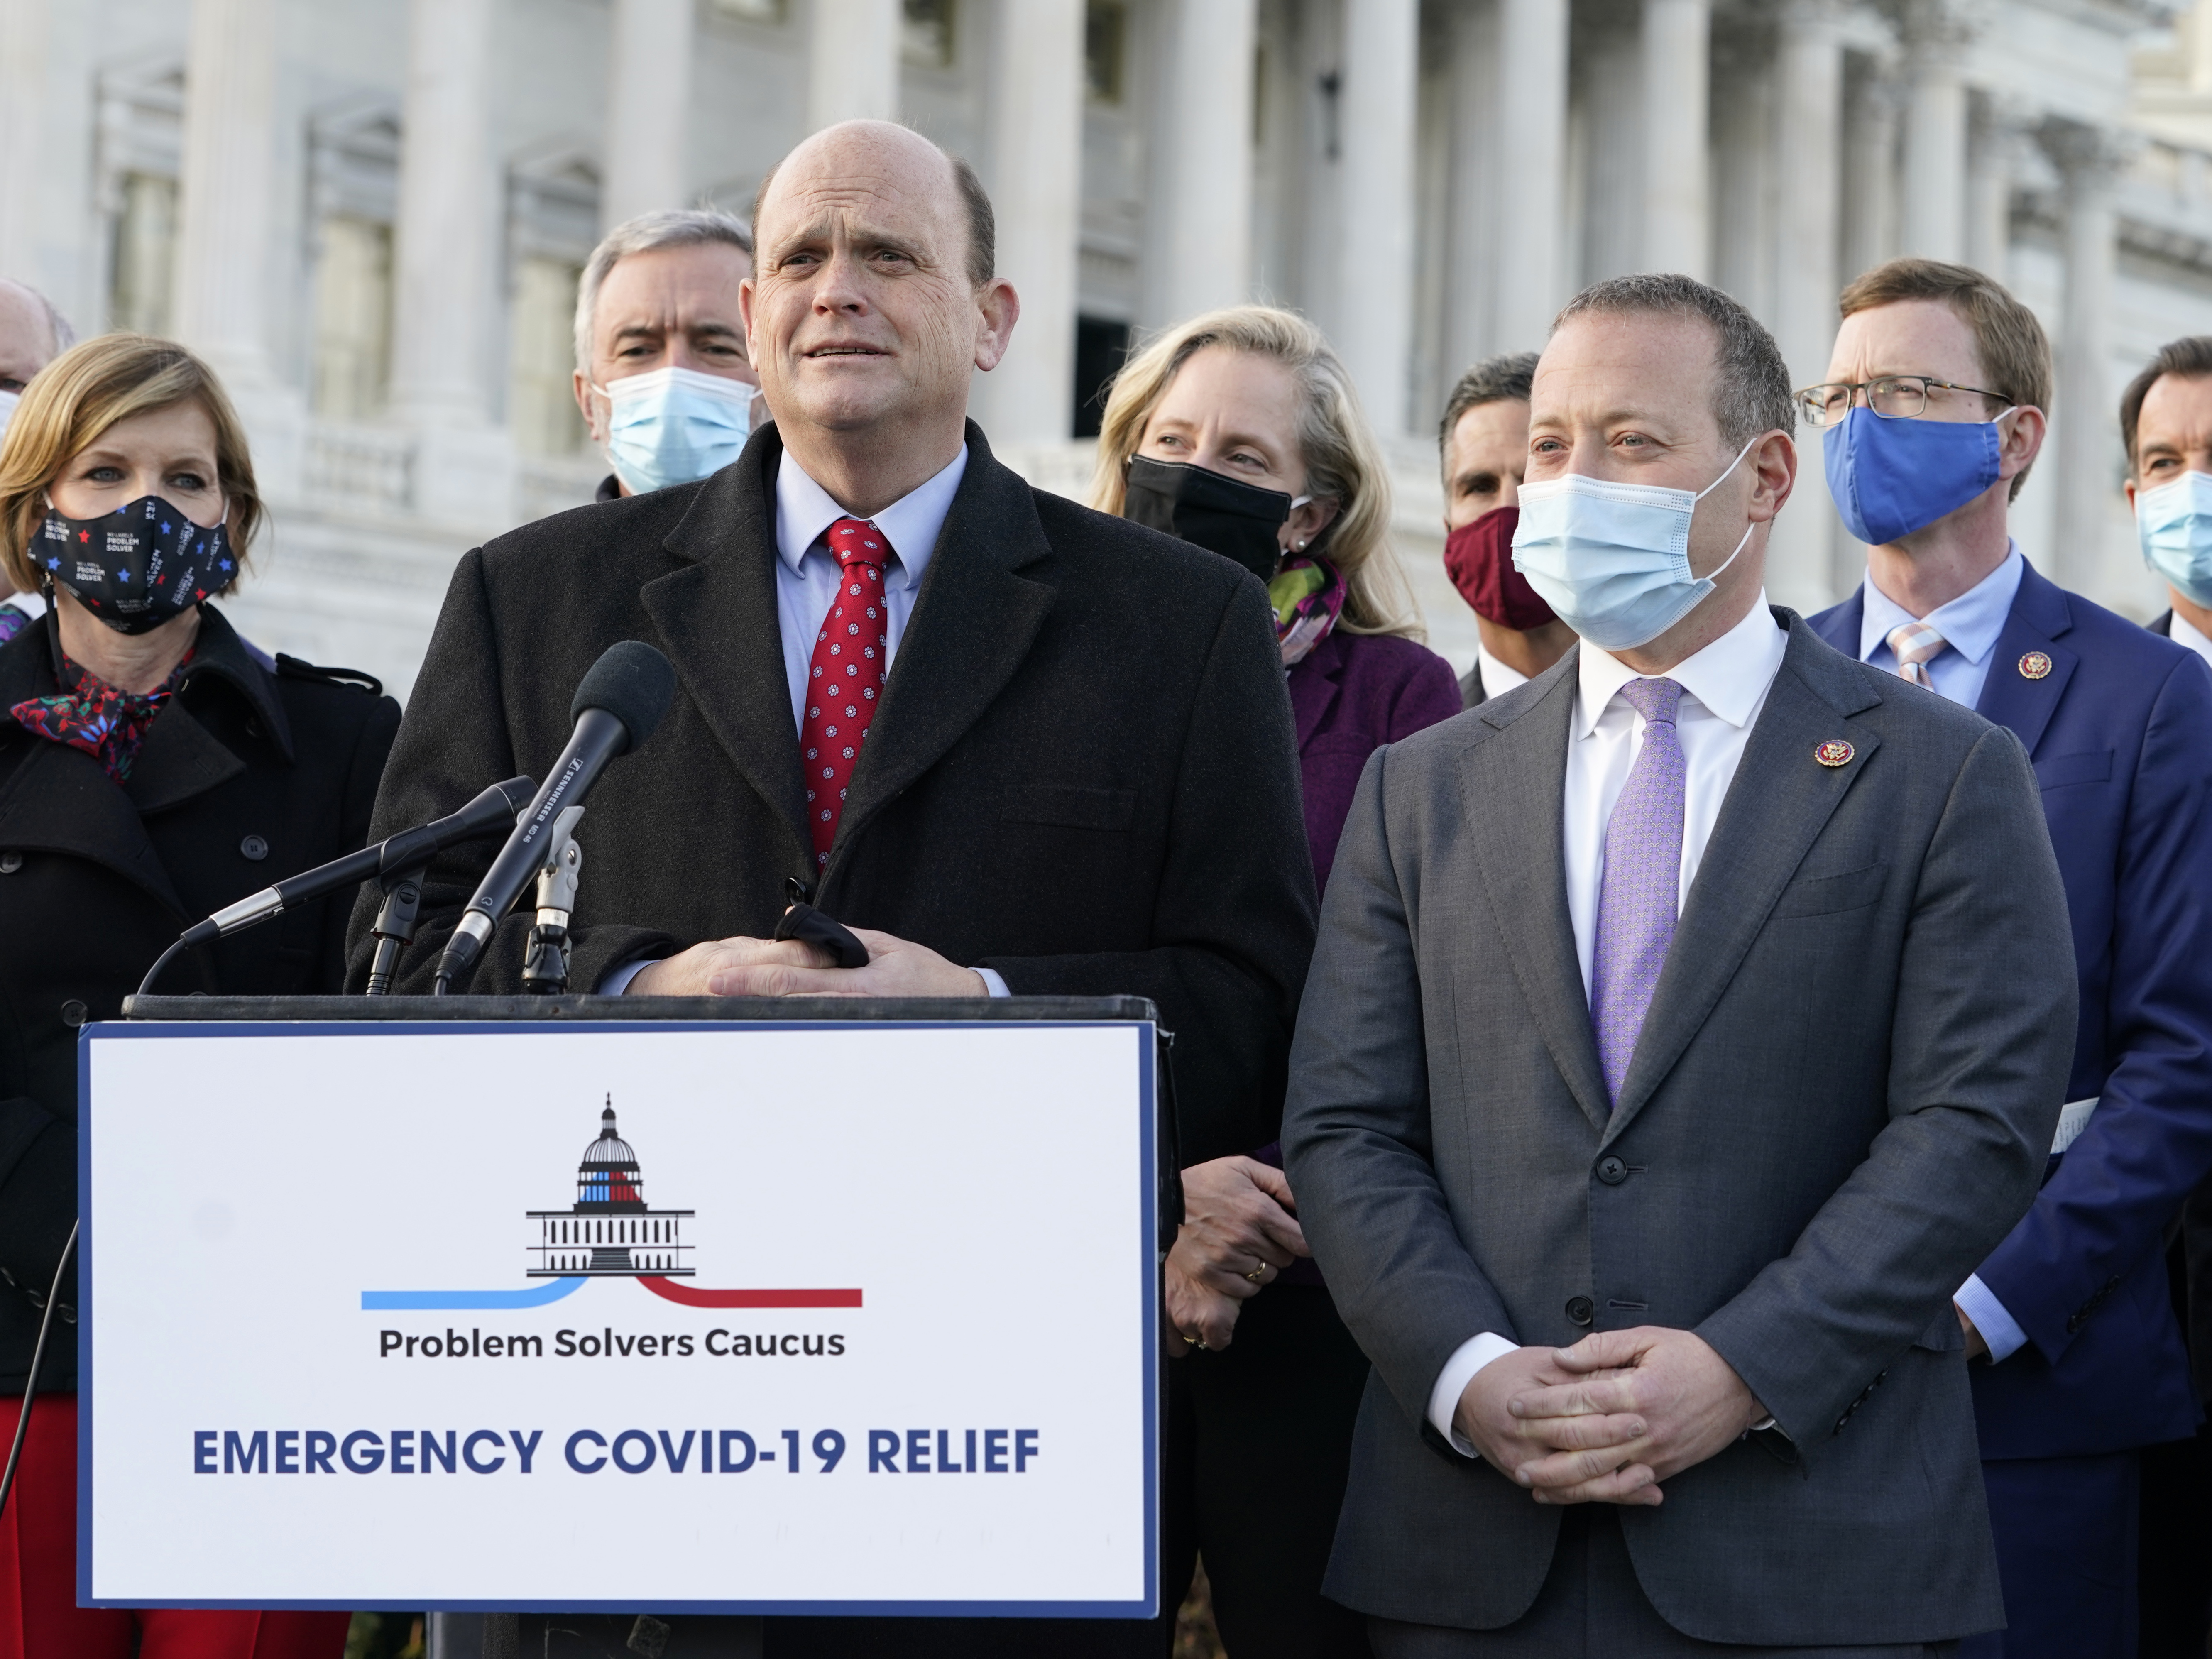 Members of the bipartisan Problem Solvers Caucus — co-chairs Rep. Tom Reed, R-N.Y., at podium, and Rep. Josh Gottheimer, D-N.J., right — took credit for helping to break the logjam on an emergency COVID-19 relief bill. CREDIT: Jacquelyn Martin/AP